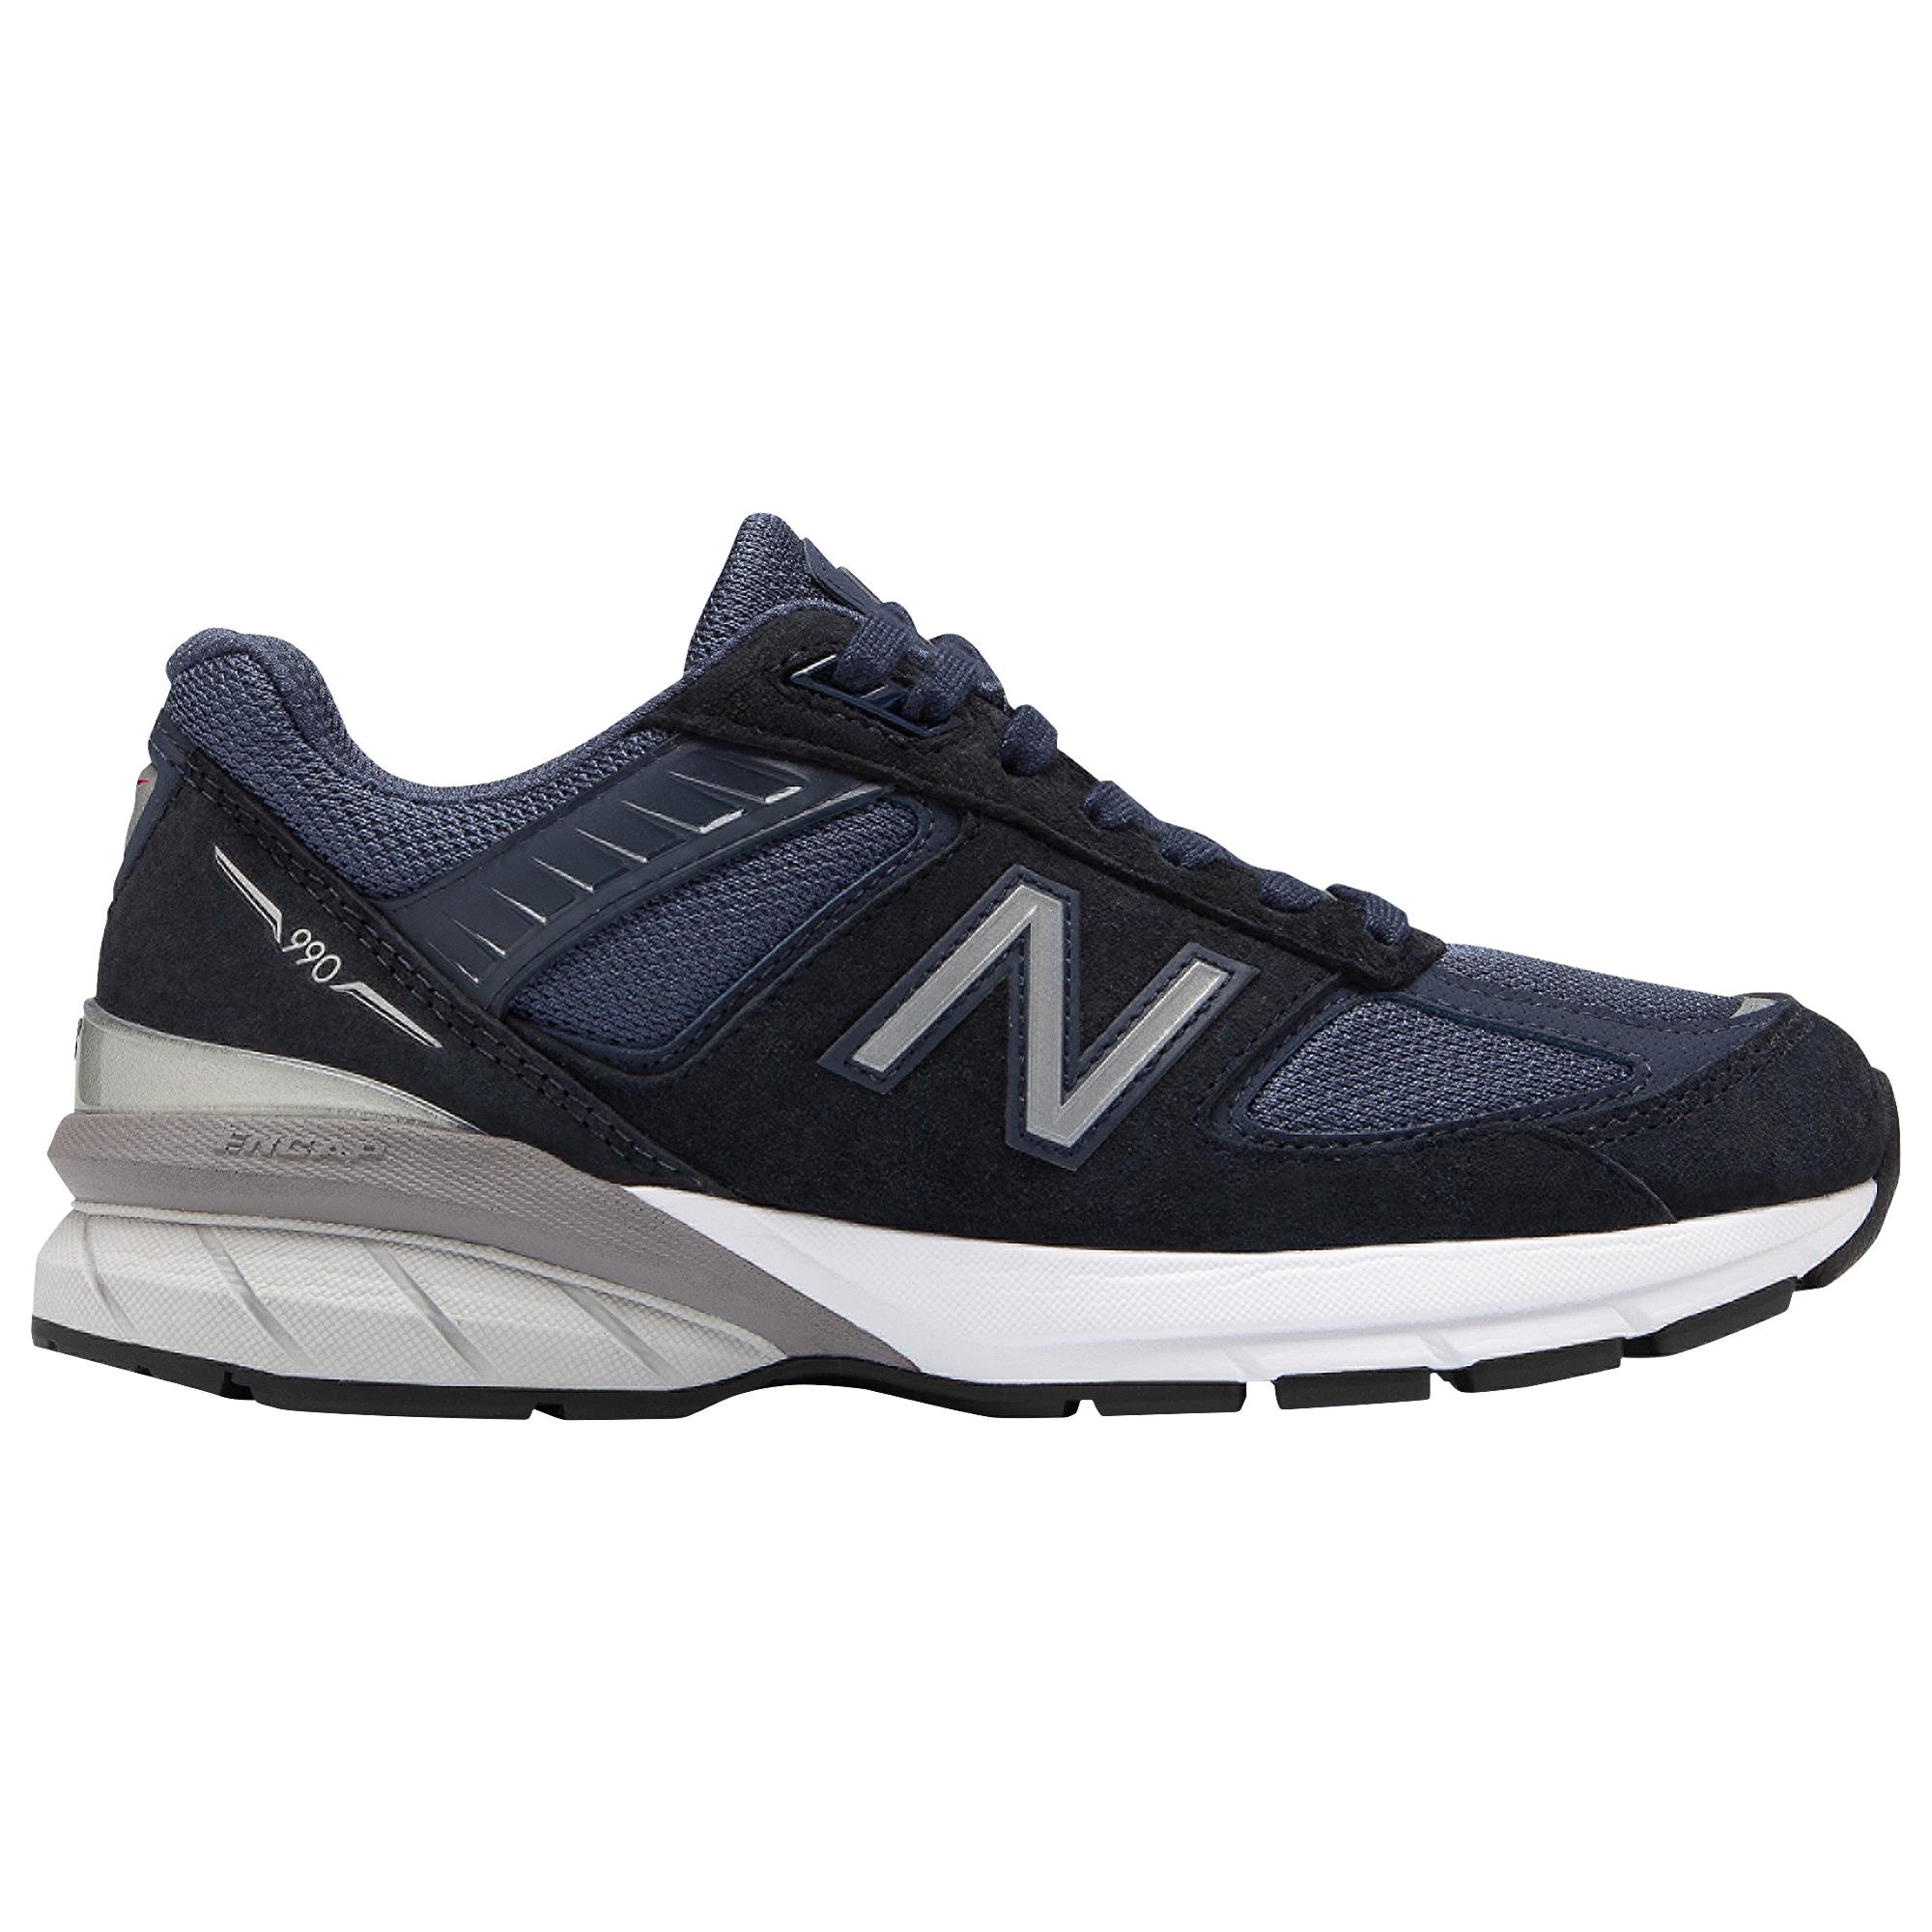 New Balance Suede 990 V5 Running Shoes in Navy/Silver (Blue) - Lyst